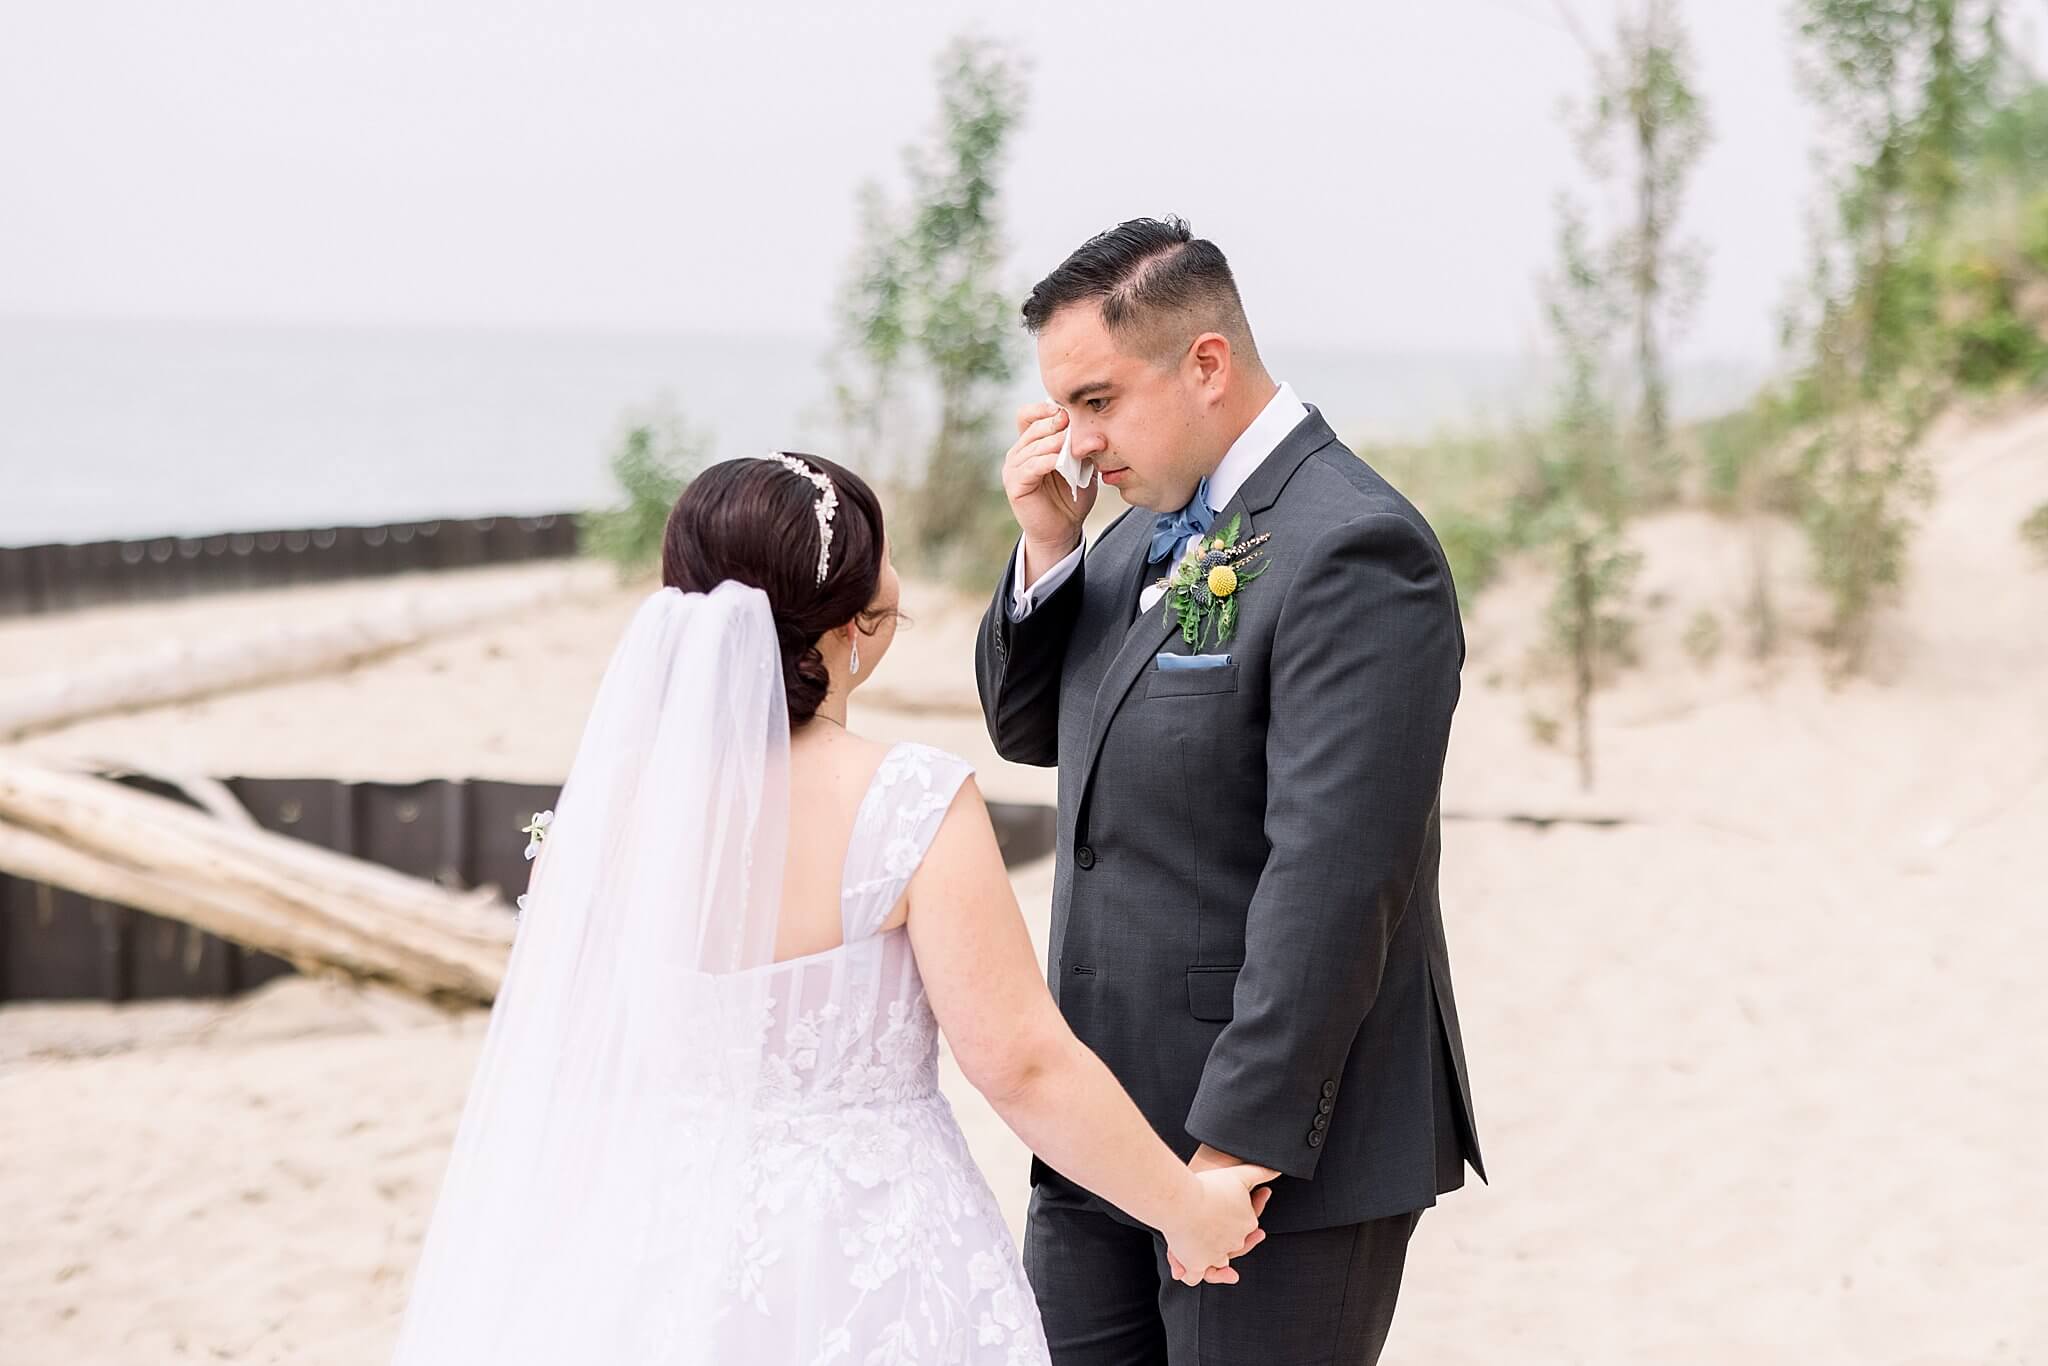 Groom cries during first look on Elberta Life Saving Station wedding day.